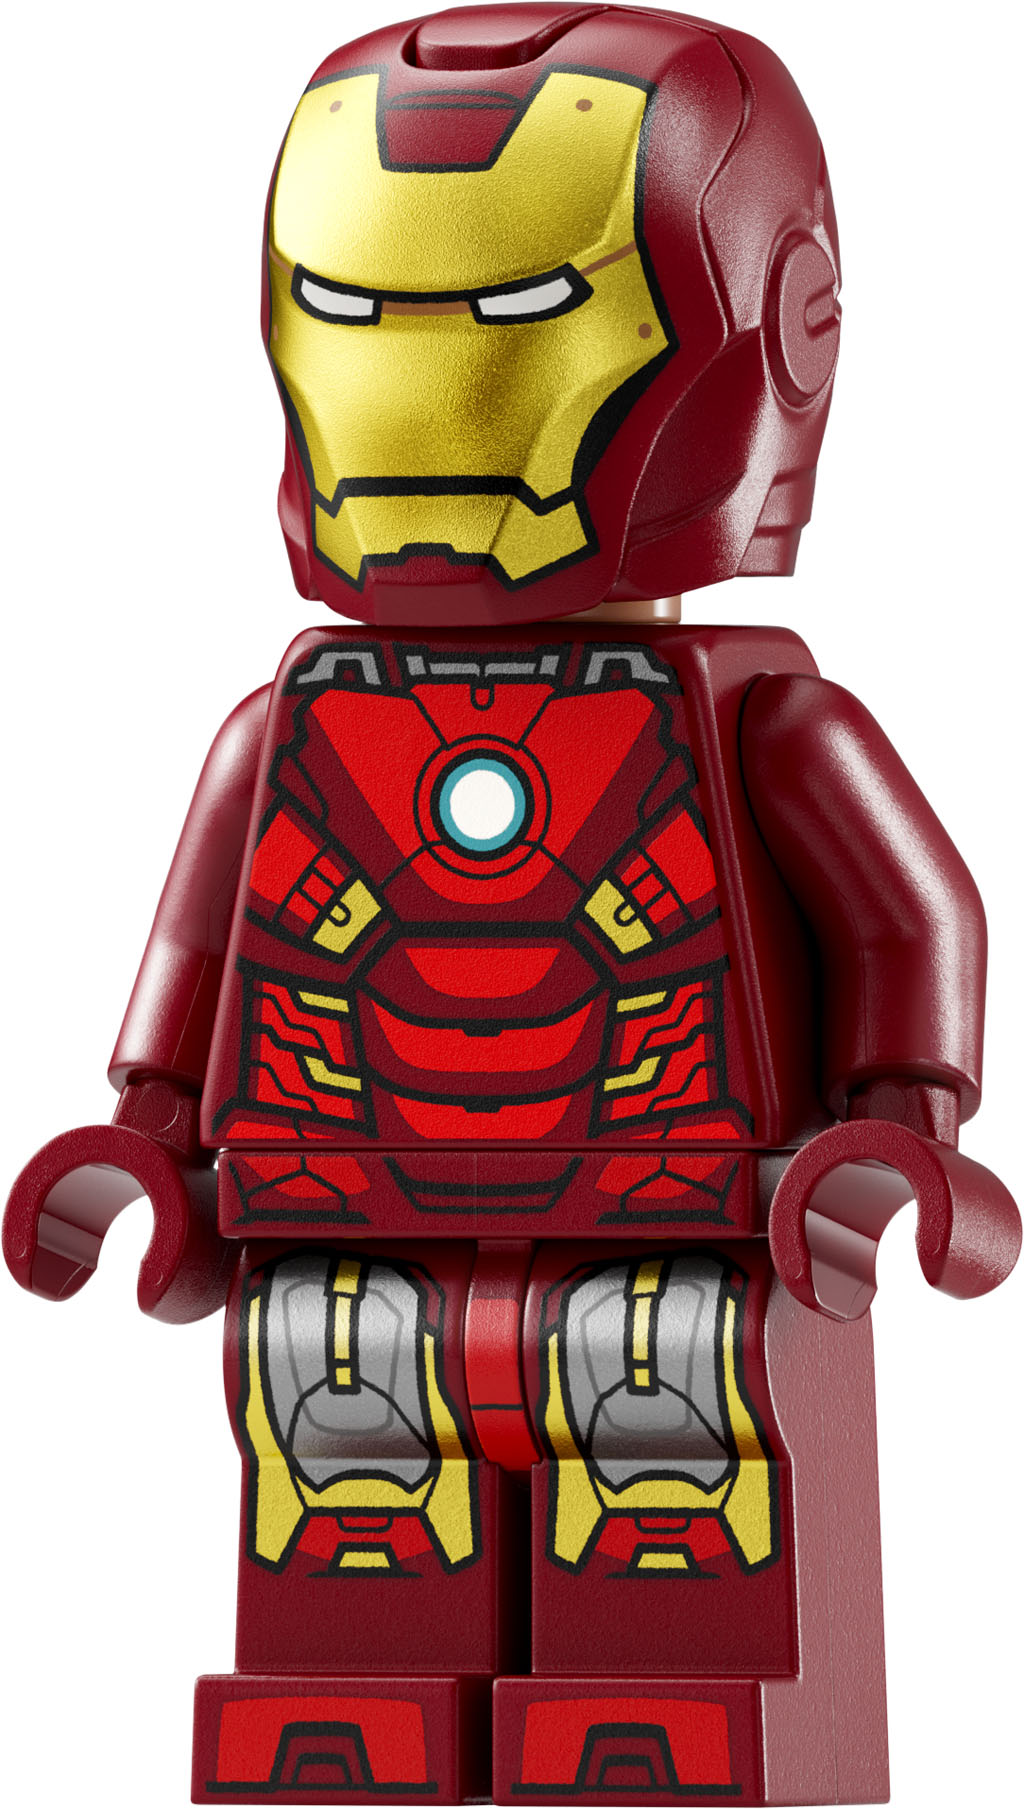 ▻ On the LEGO Shop: the LEGO Marvel 76269 Avengers Tower set is available -  HOTH BRICKS